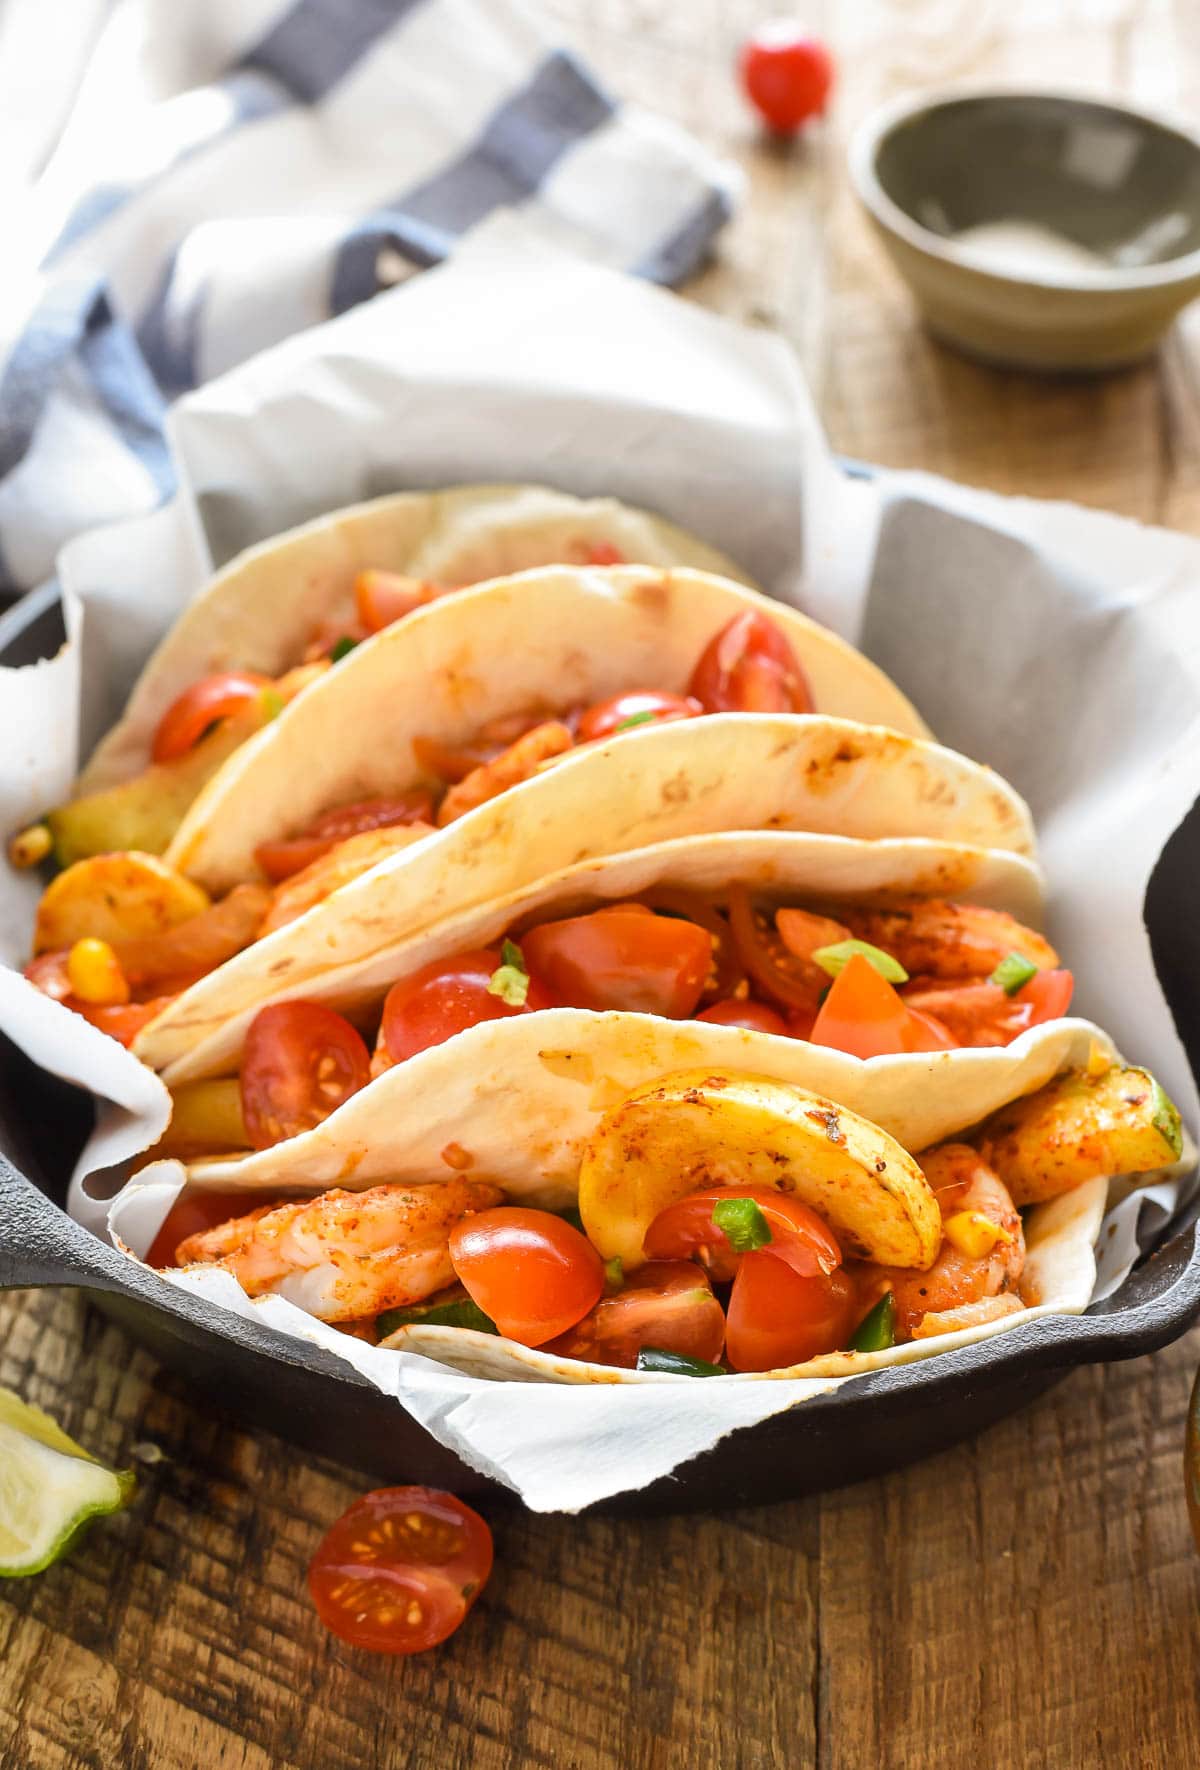 Sheet Pan Shrimp Tacos are a great way to use up those end of summer veggies!